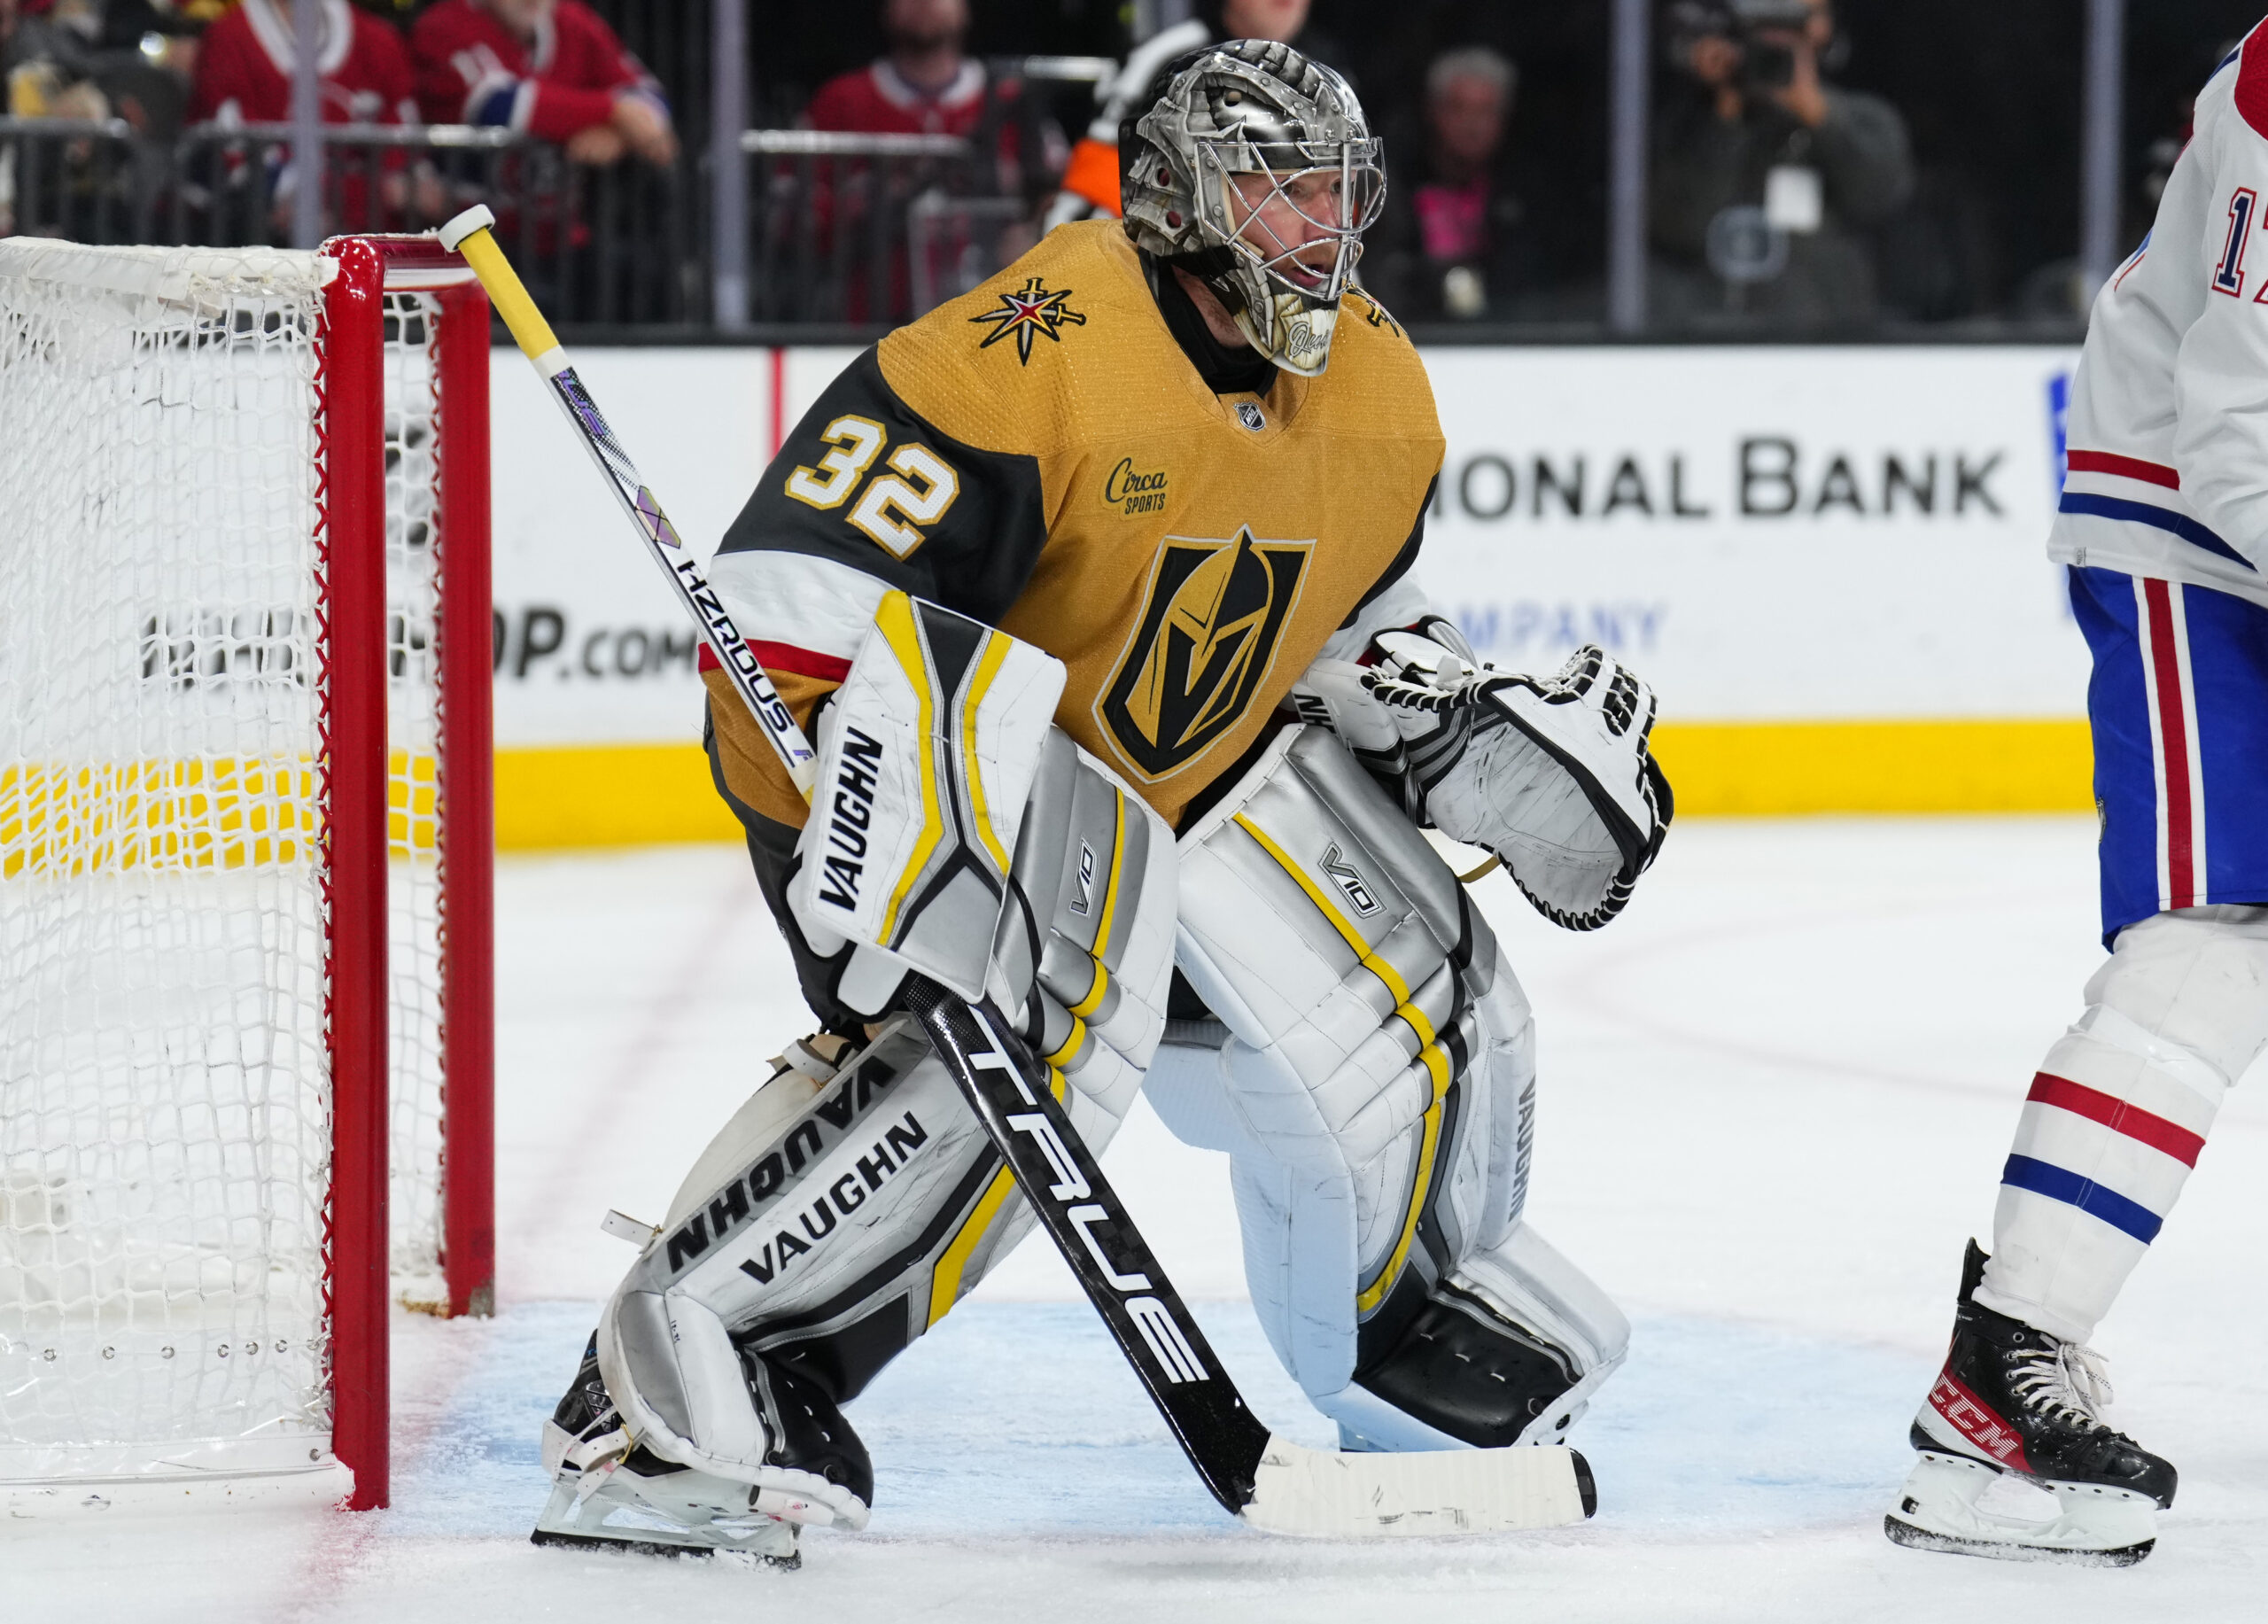 Jonathan Quick's Expectations With the New York Rangers